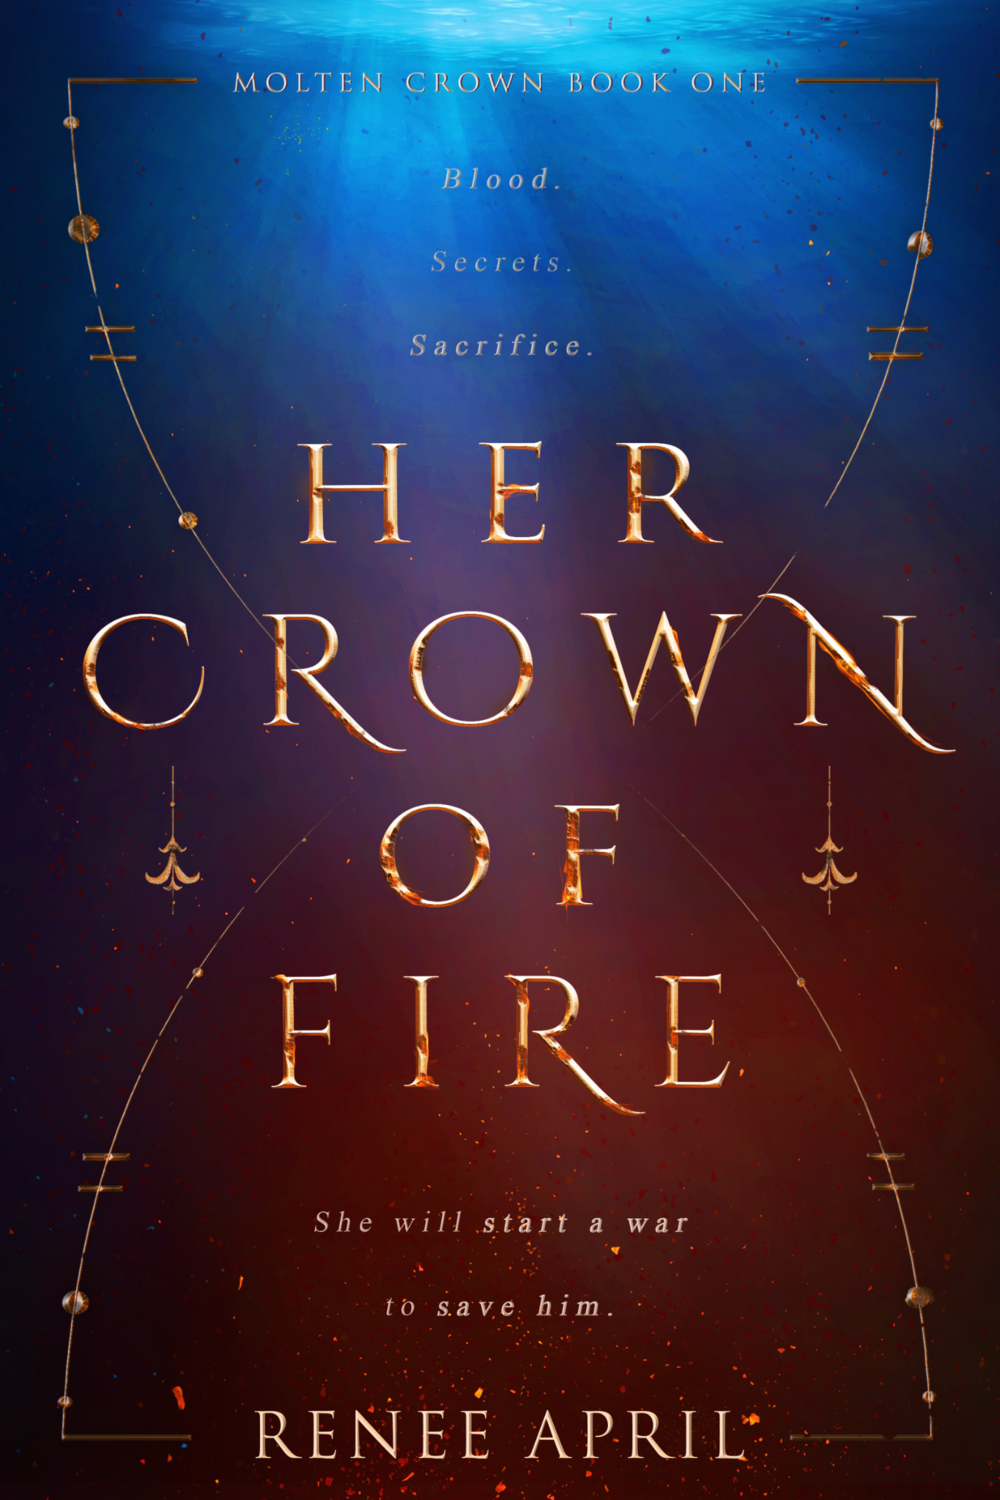 (eBook) Her Crown of Fire (Molten Crown #1) by Renee April